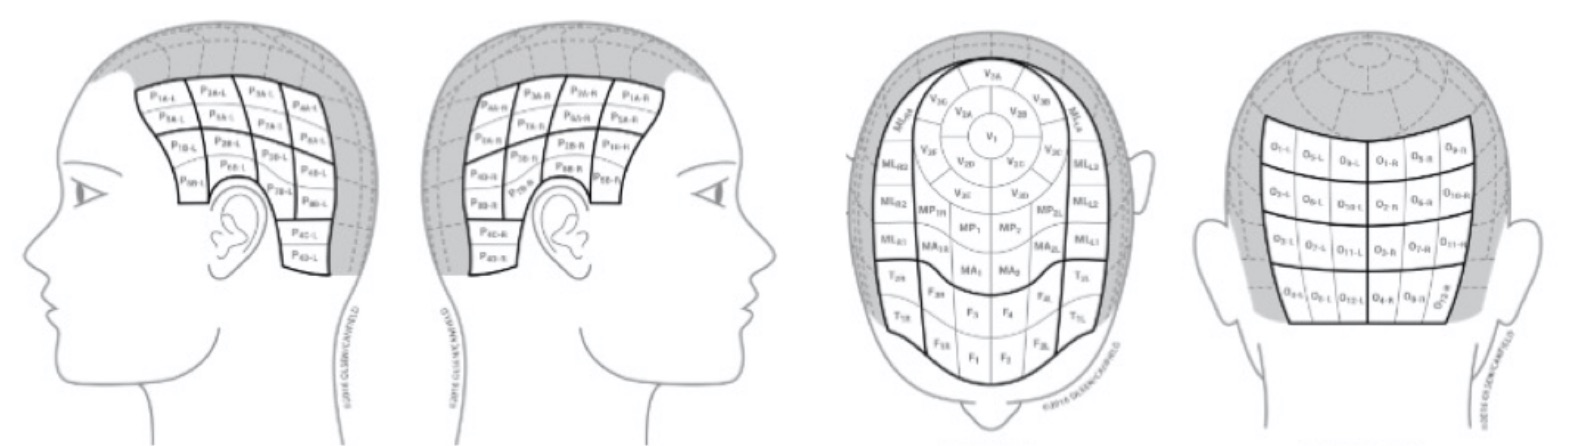 Illustrated left side of a human head, with the left scalp being segmented into different regions depicting 18% of the total scalp area. Right side of a human head, with the right scalp being segmented into different regions depicting 18% of the total scalp area. Back of a human head, with the back scalp being segmented into different regions depicting 24% of the total scalp area. Top of a human head, with the top scalp being segmented into different regions depicting 40% of the total scalp area.